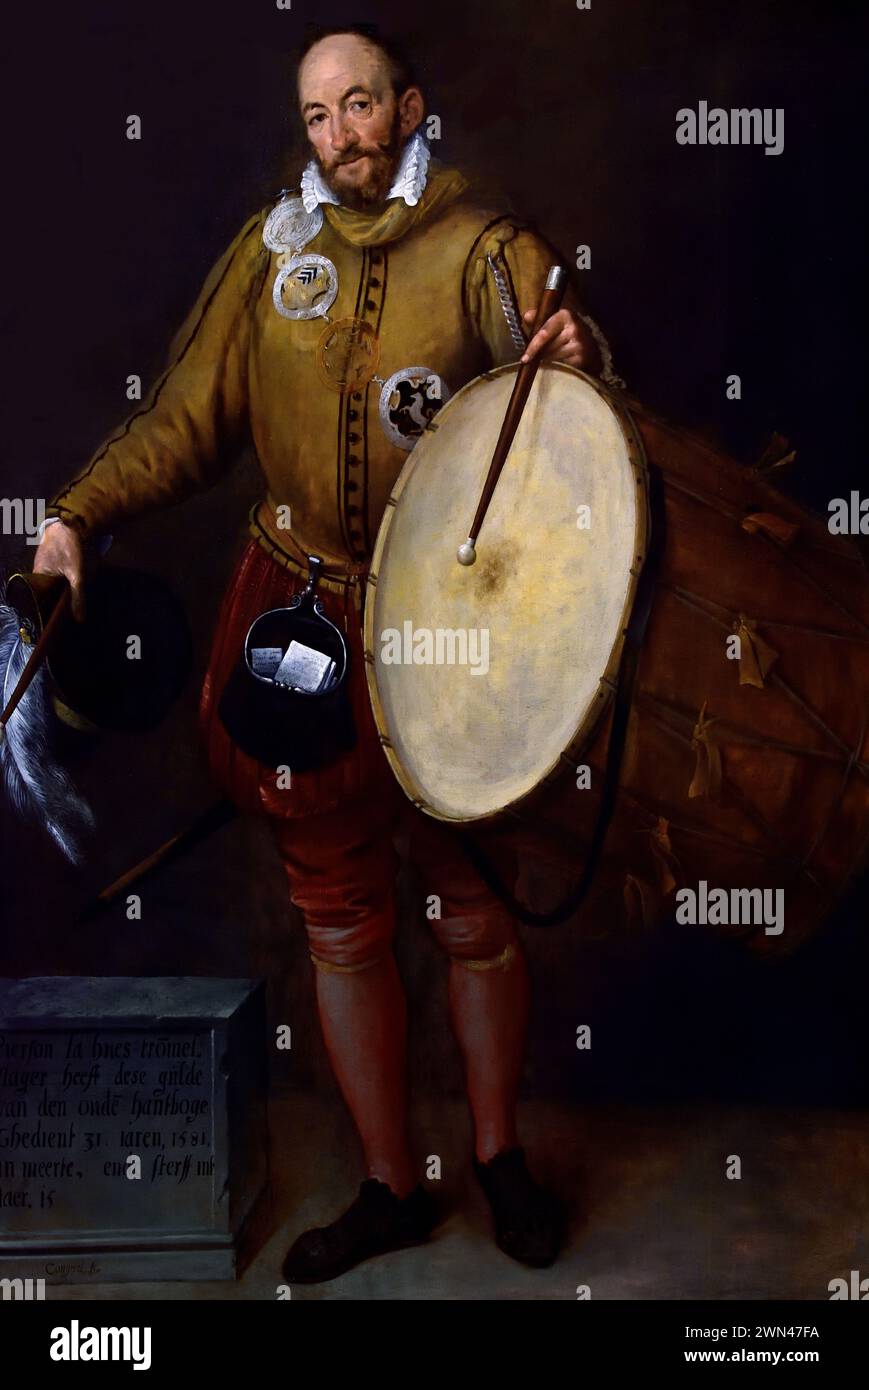 Pierson la Hues, Drummer and Page of the Old Archers' Guild Gillis Coignet I 1542-1599 Royal Museum of Fine Arts,  Antwerp, Belgium, Belgian. Stock Photo